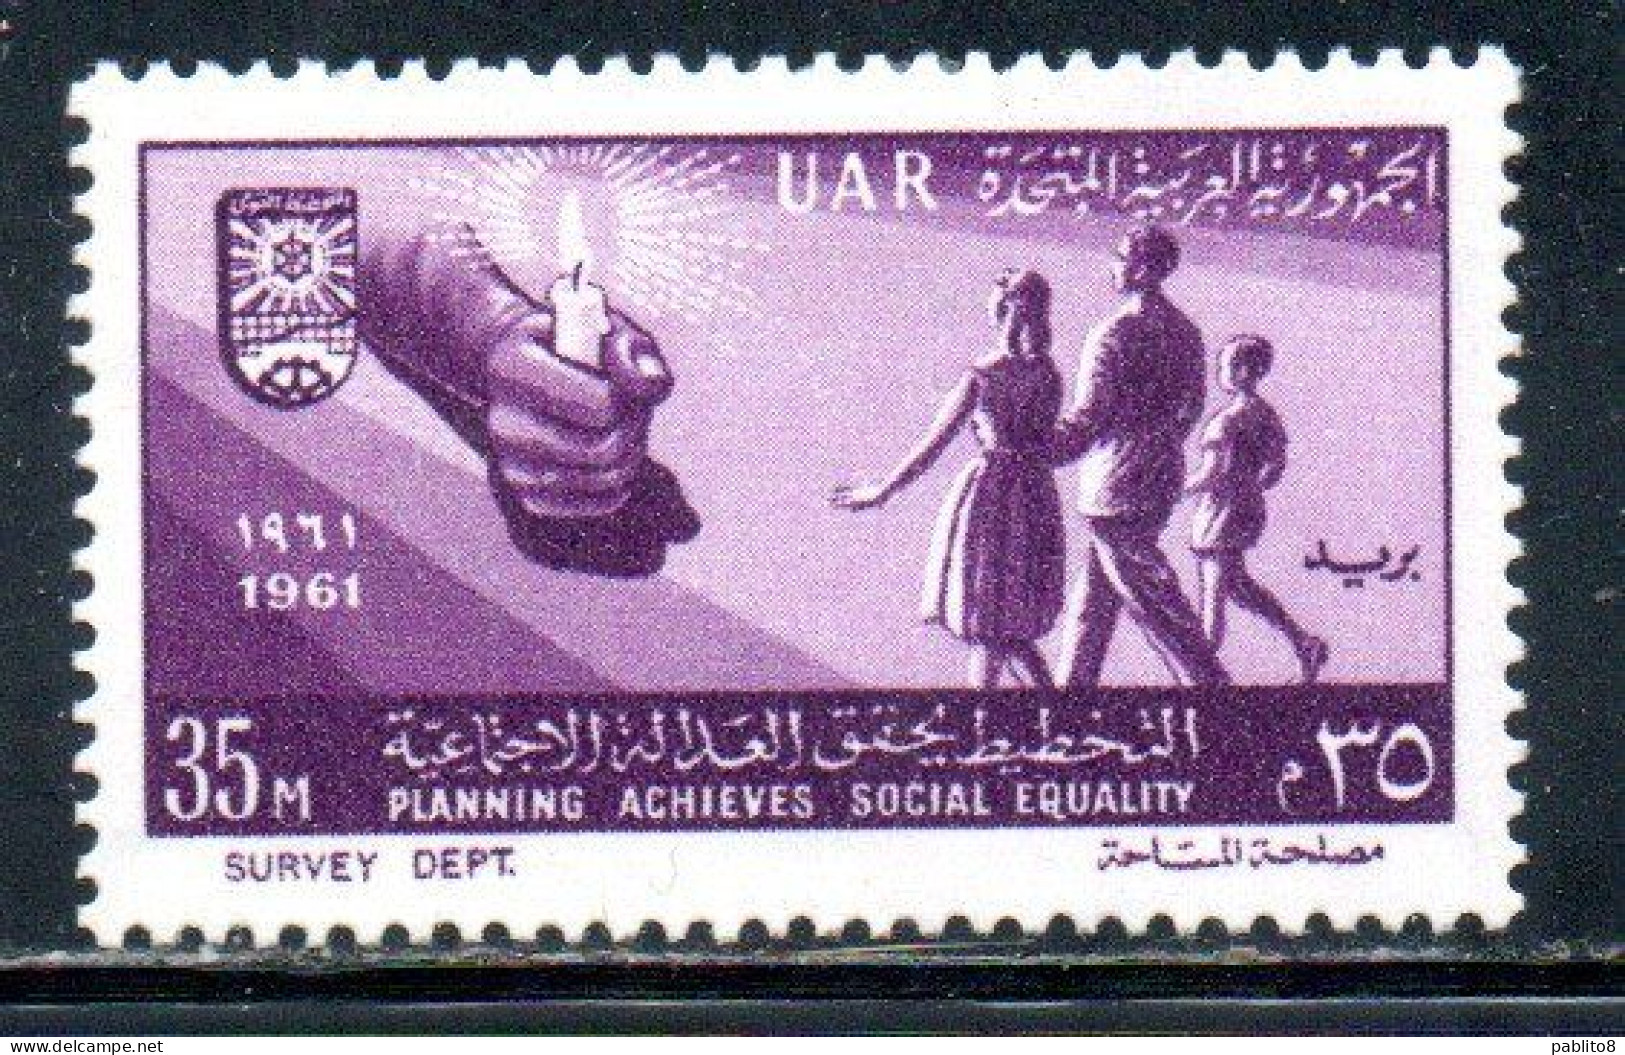 UAR EGYPT EGITTO 1961 PLANNING ACHIEVES SOCIAL EQUALITY HAND HOLDING CANDLE AND FAMILY 35m MH - Unused Stamps